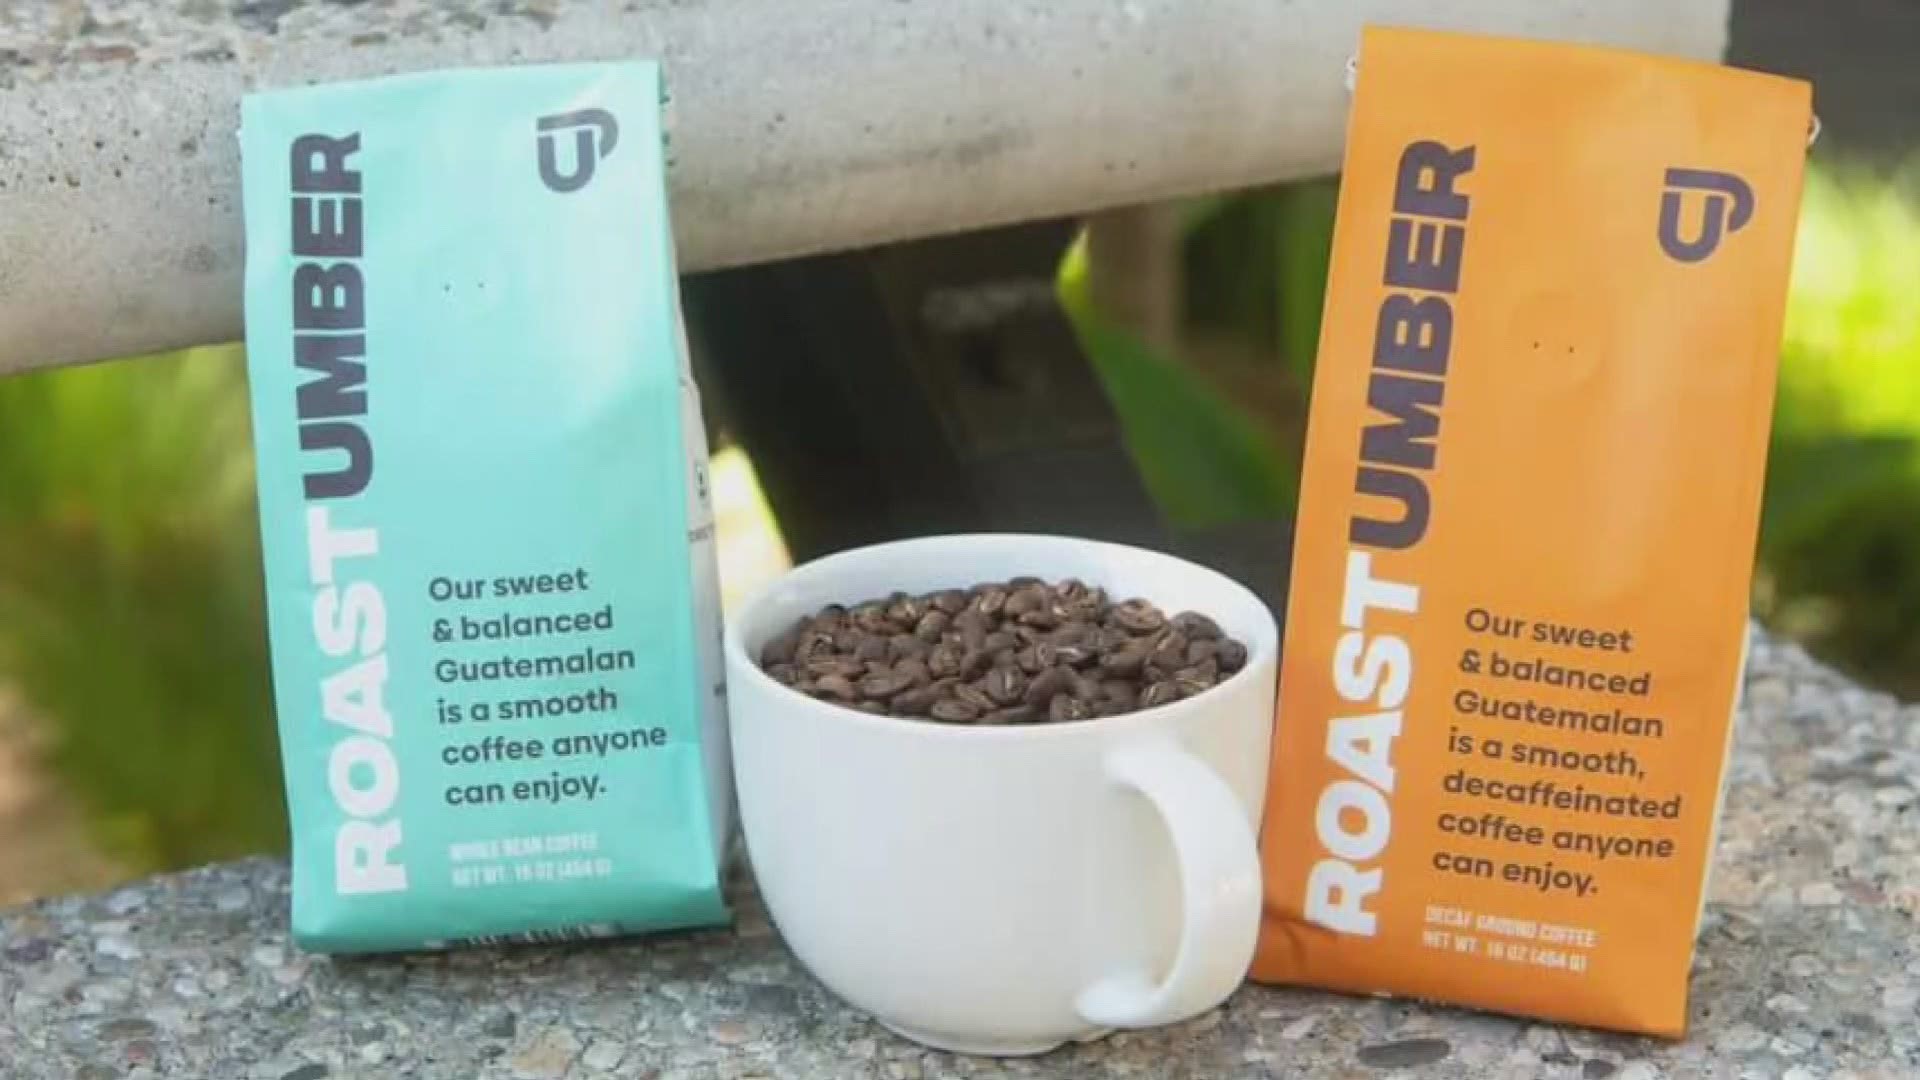 Startup coffee company Roast Umbers is raising capital through crowdfunding to support their growing business